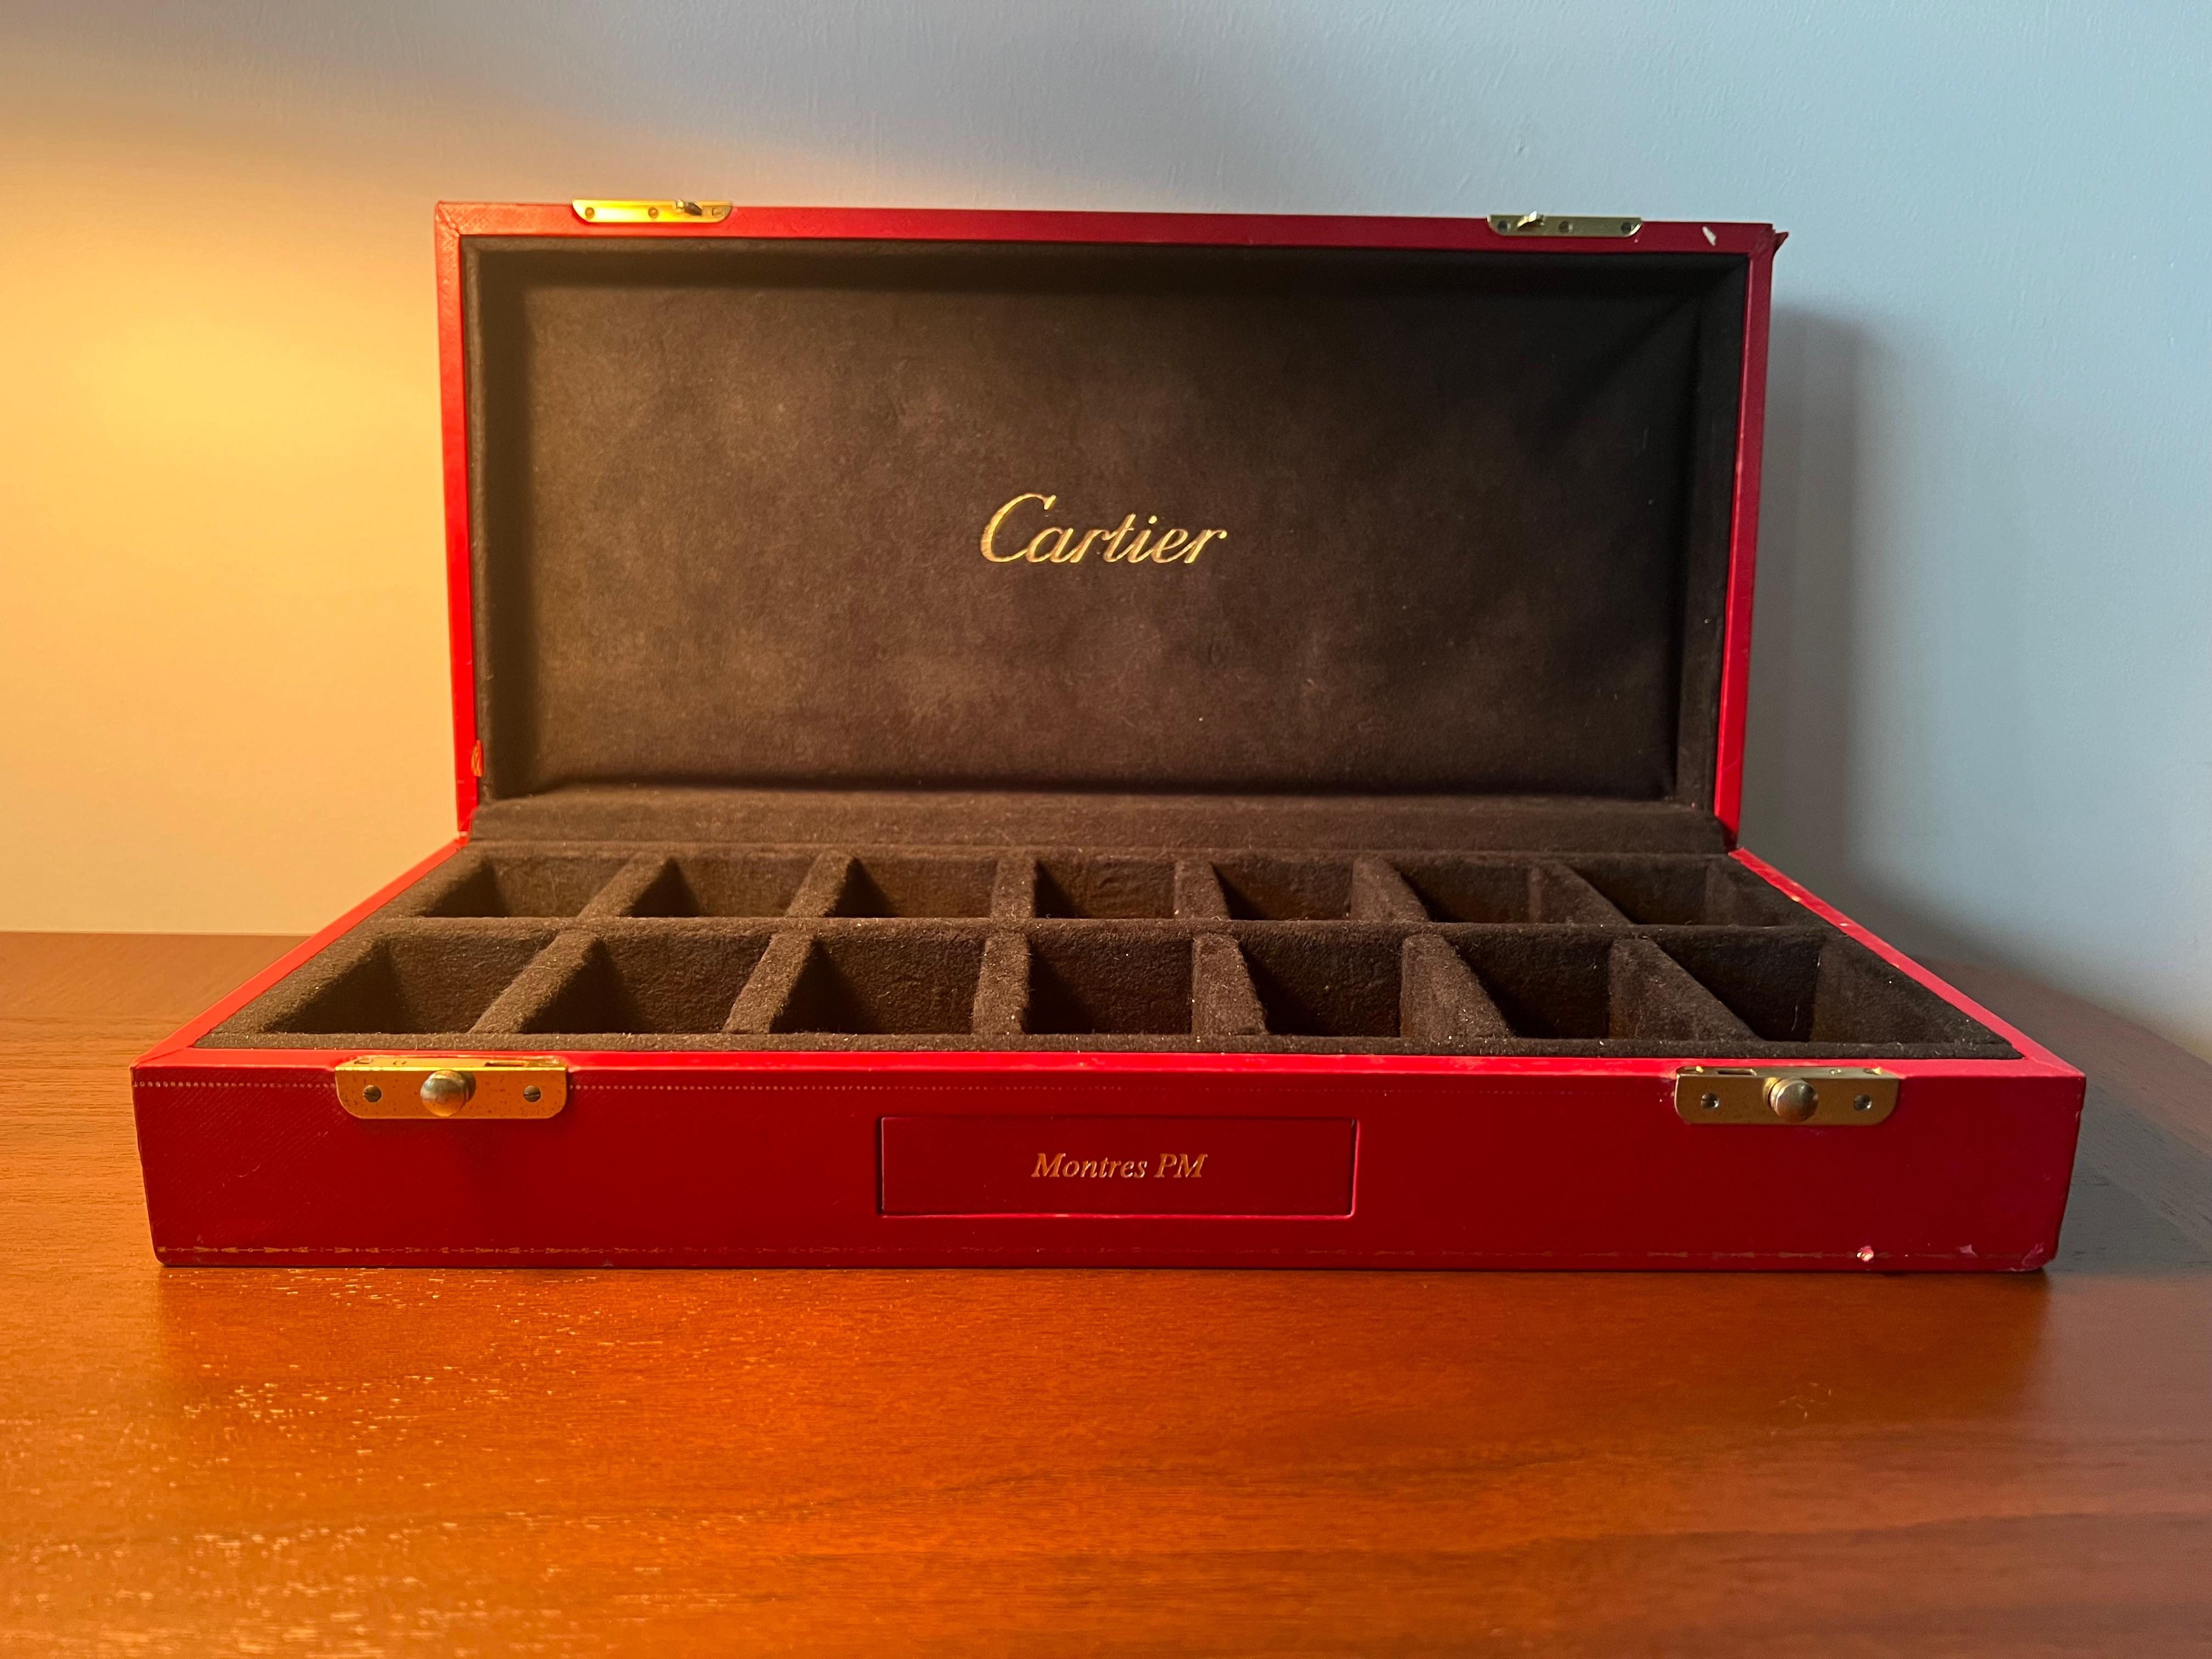 Unusual and hard to find a Cartier store watch display box. Holds 14 watches. Perfect for a Cartier watch collection!